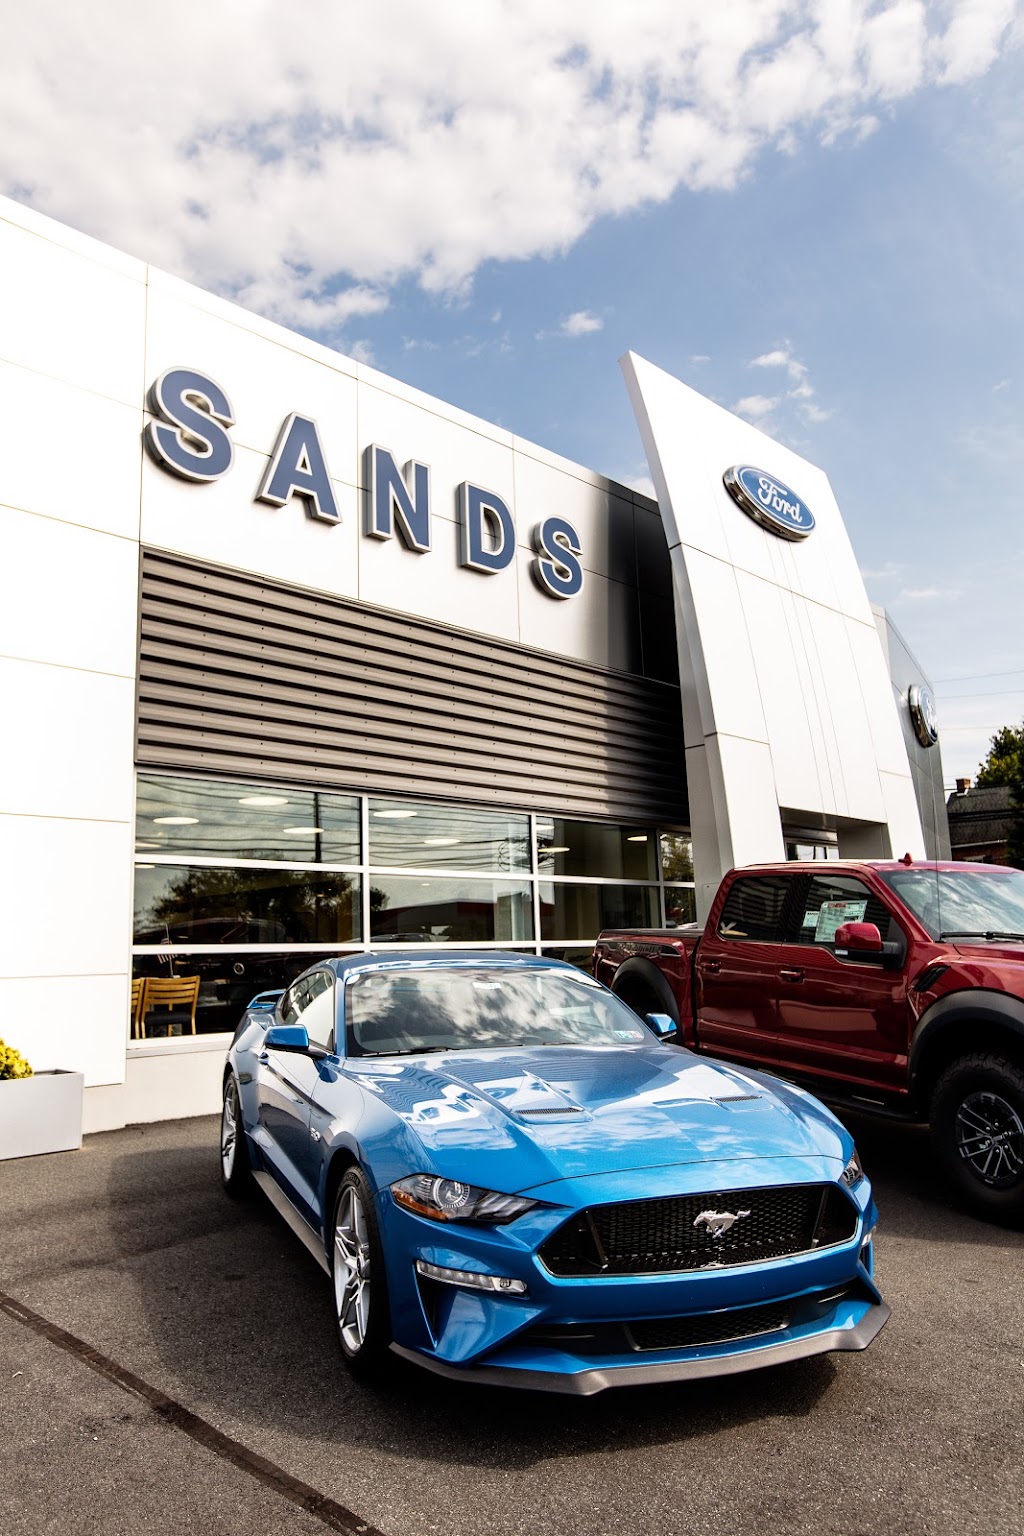 Sands Ford of Red Hill | 602 Main St, Red Hill, PA 18076 | Phone: (215) 679-7911